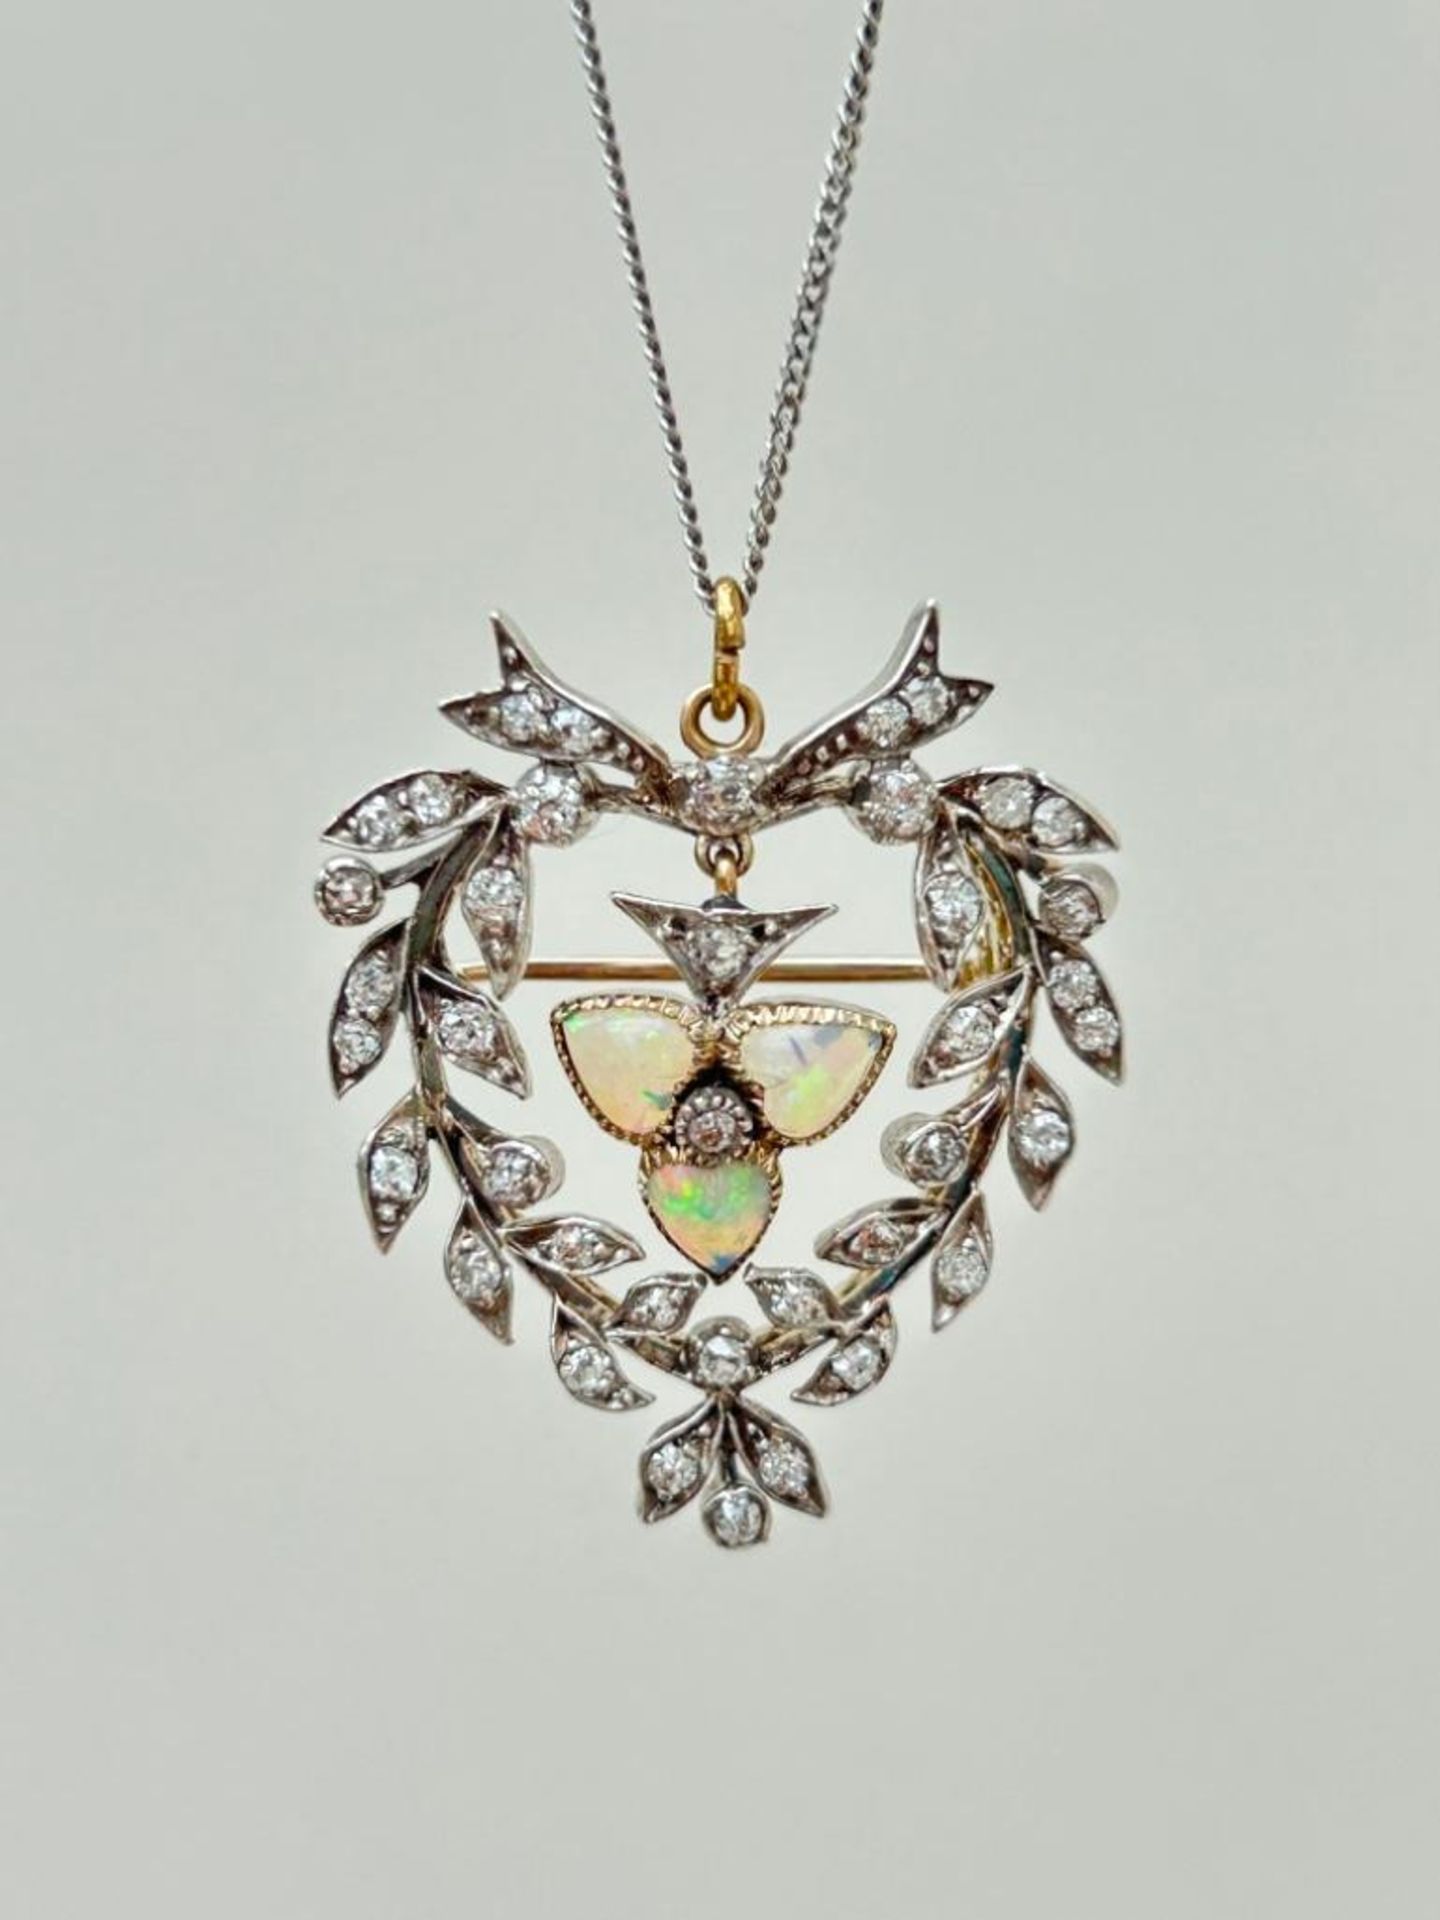 Incredible Antique Opal and Diamond Pendant on Platinum Chain in Original Fitted Box - Image 2 of 11